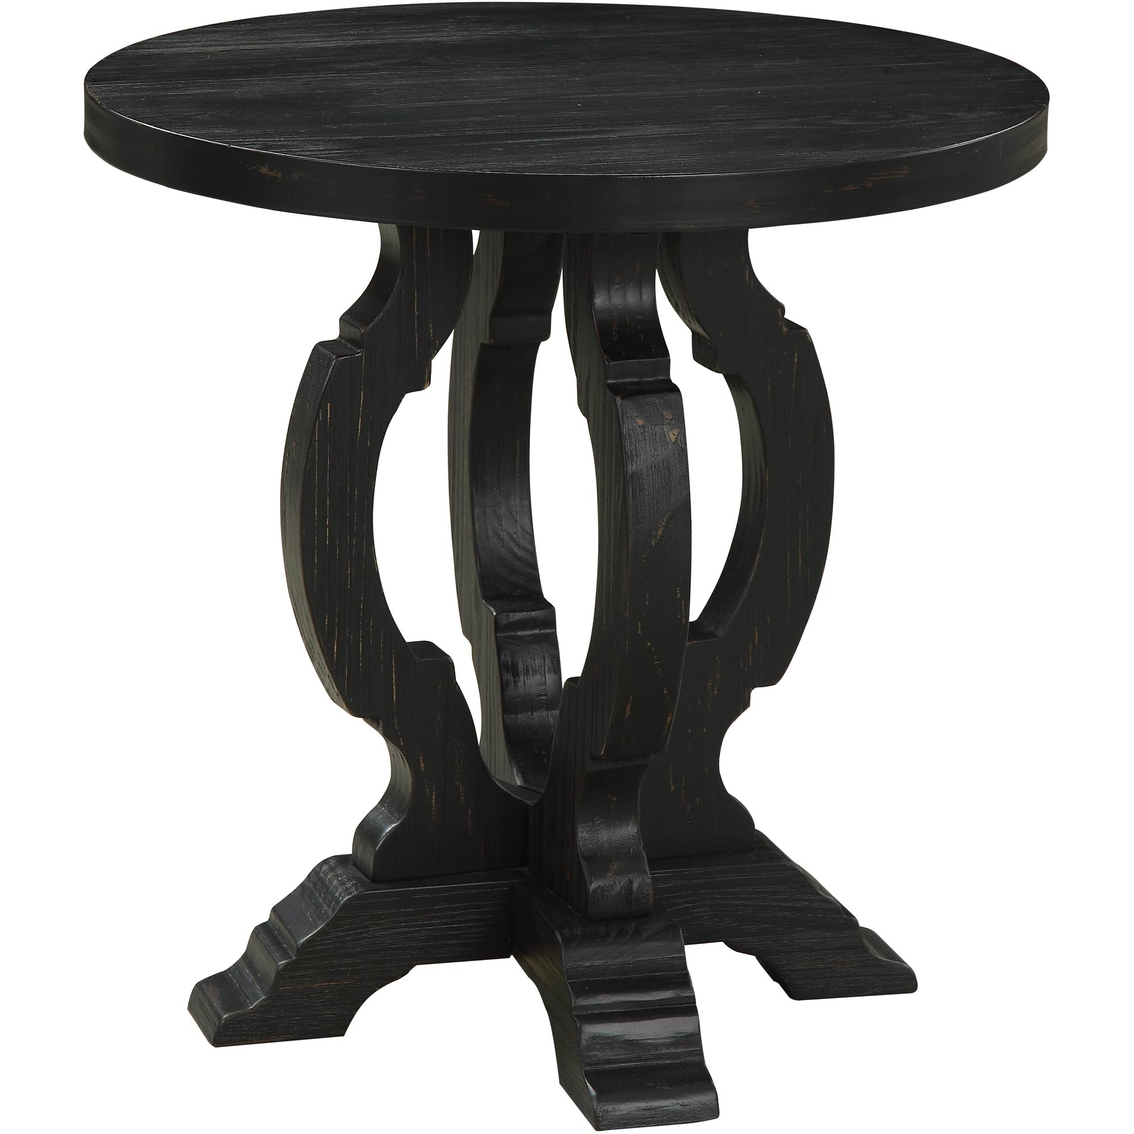 enchanting round black metal accent table outdoor small antique pedestal white dining half patio and distressed end garden classic full size bath beyond futon room ikea file box